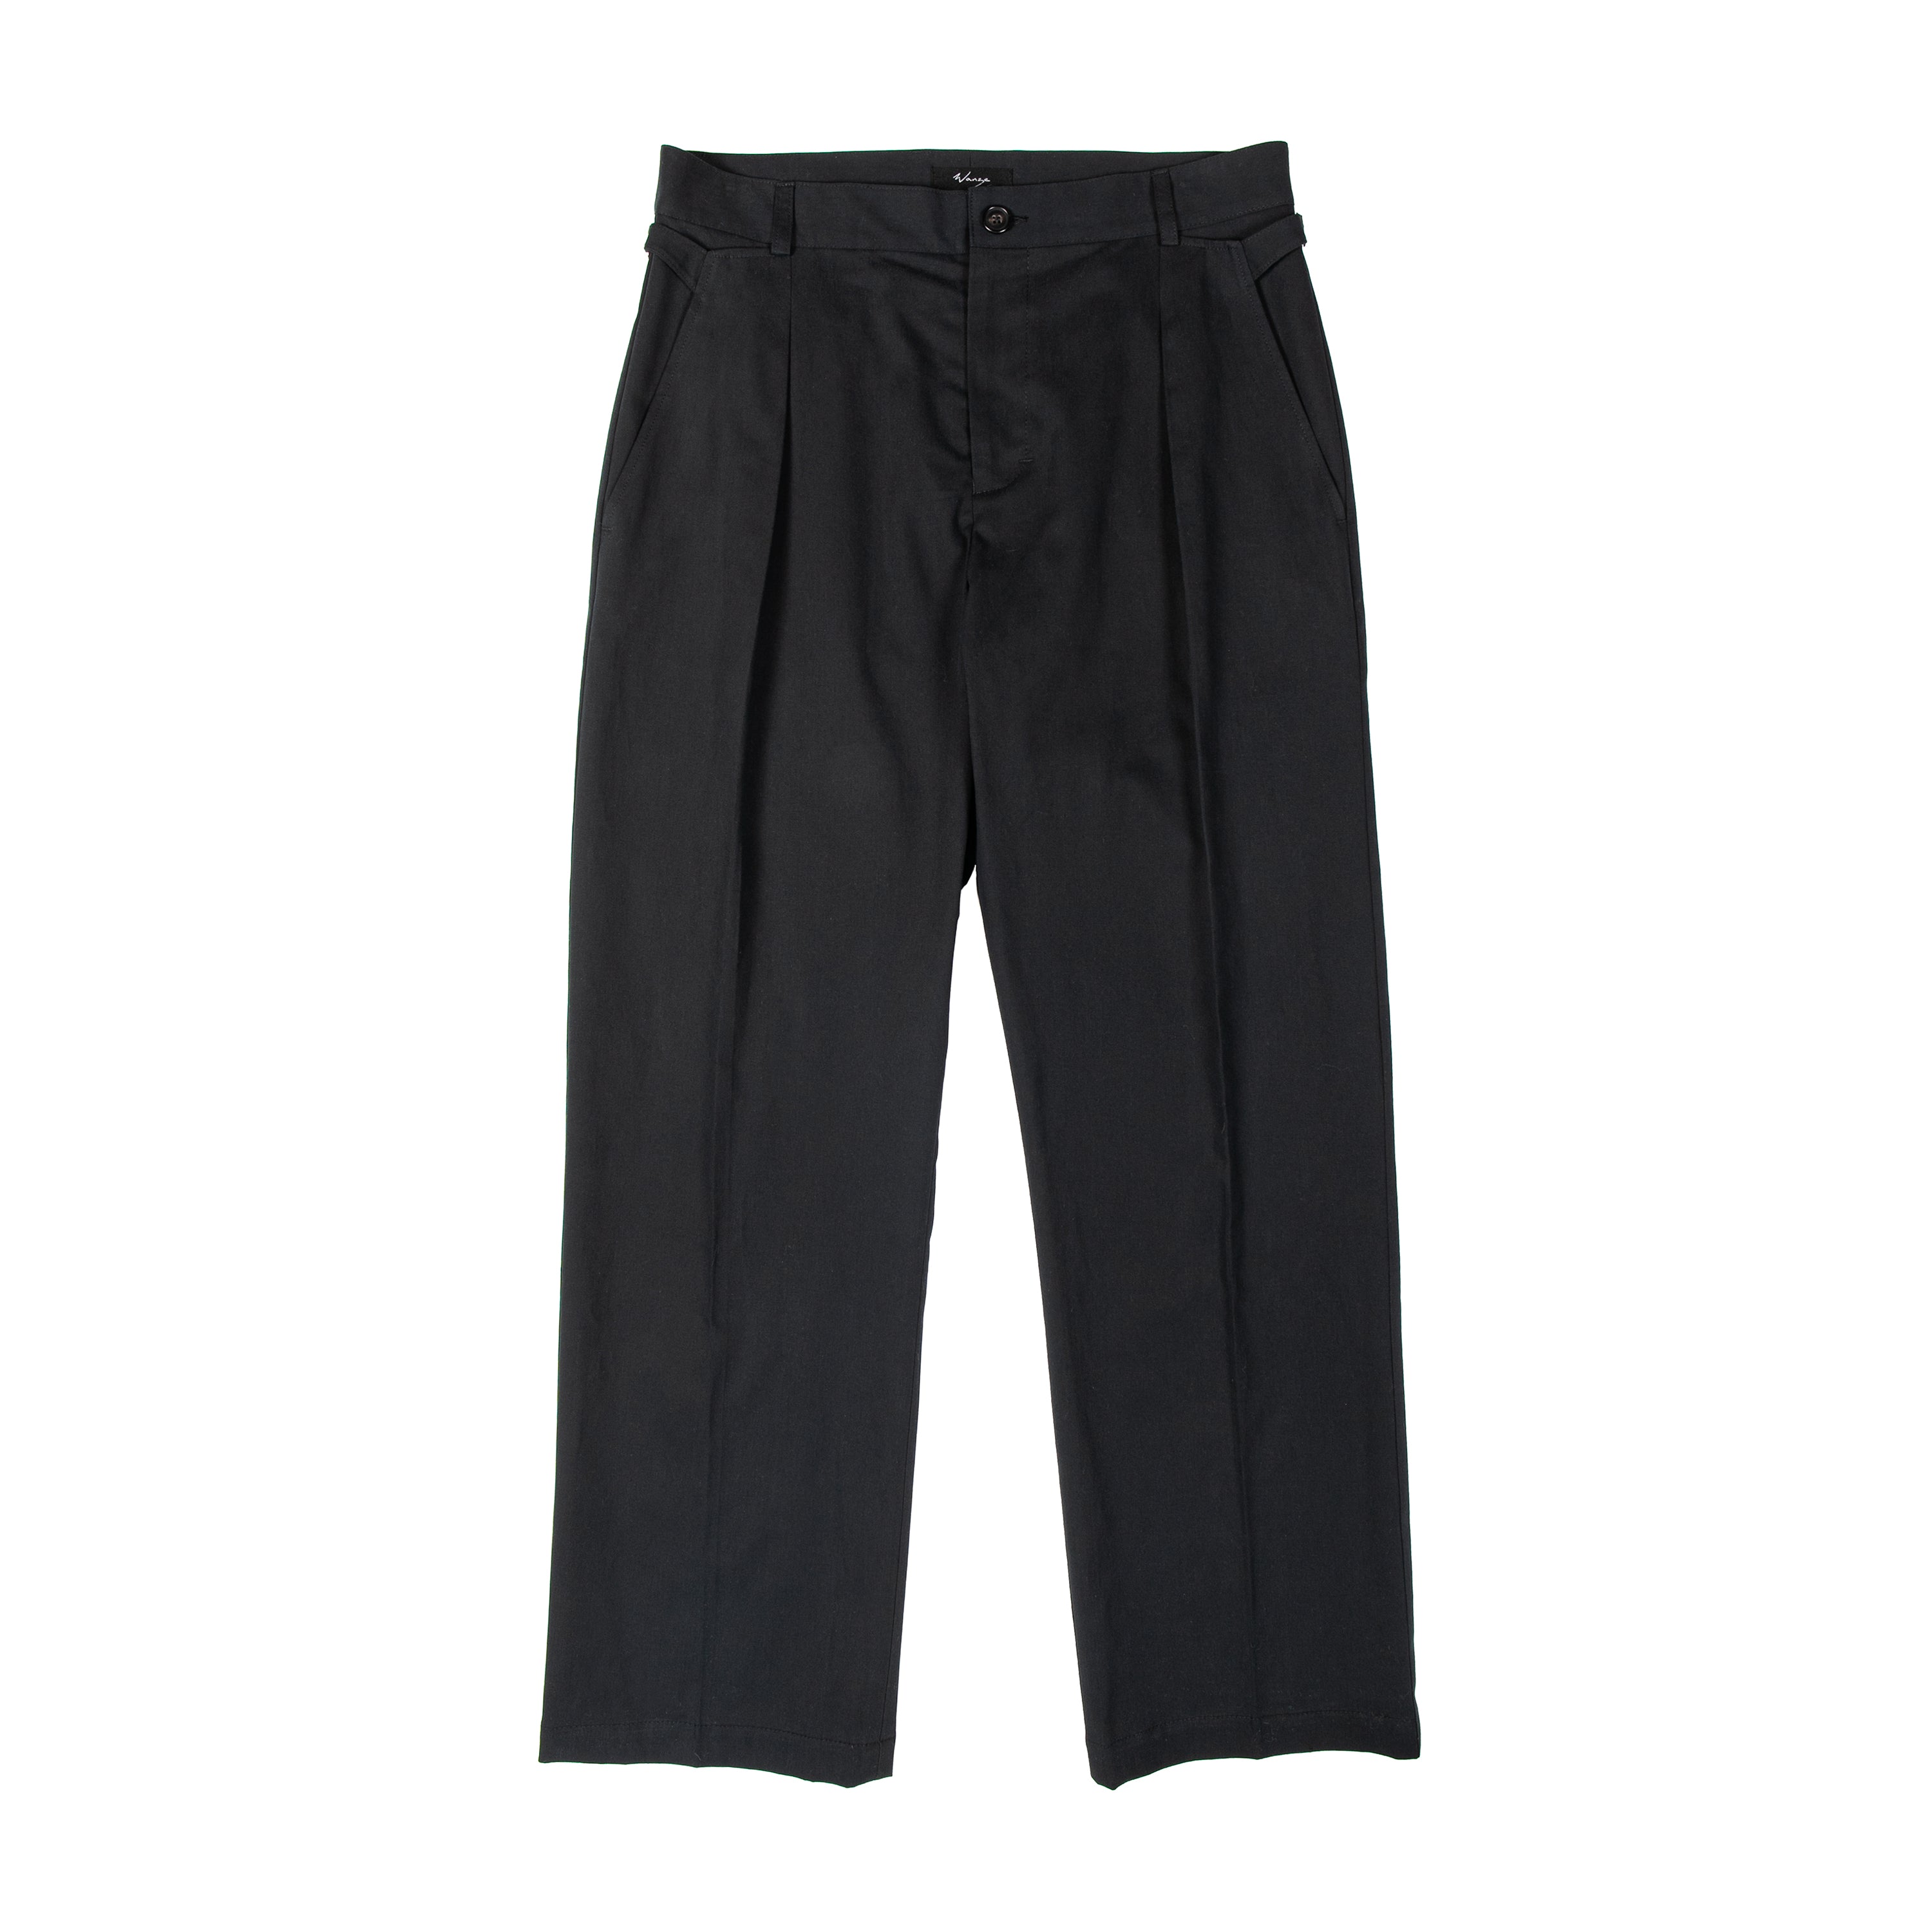 Cinch Trousers Cotton Twill Black - PREORDER